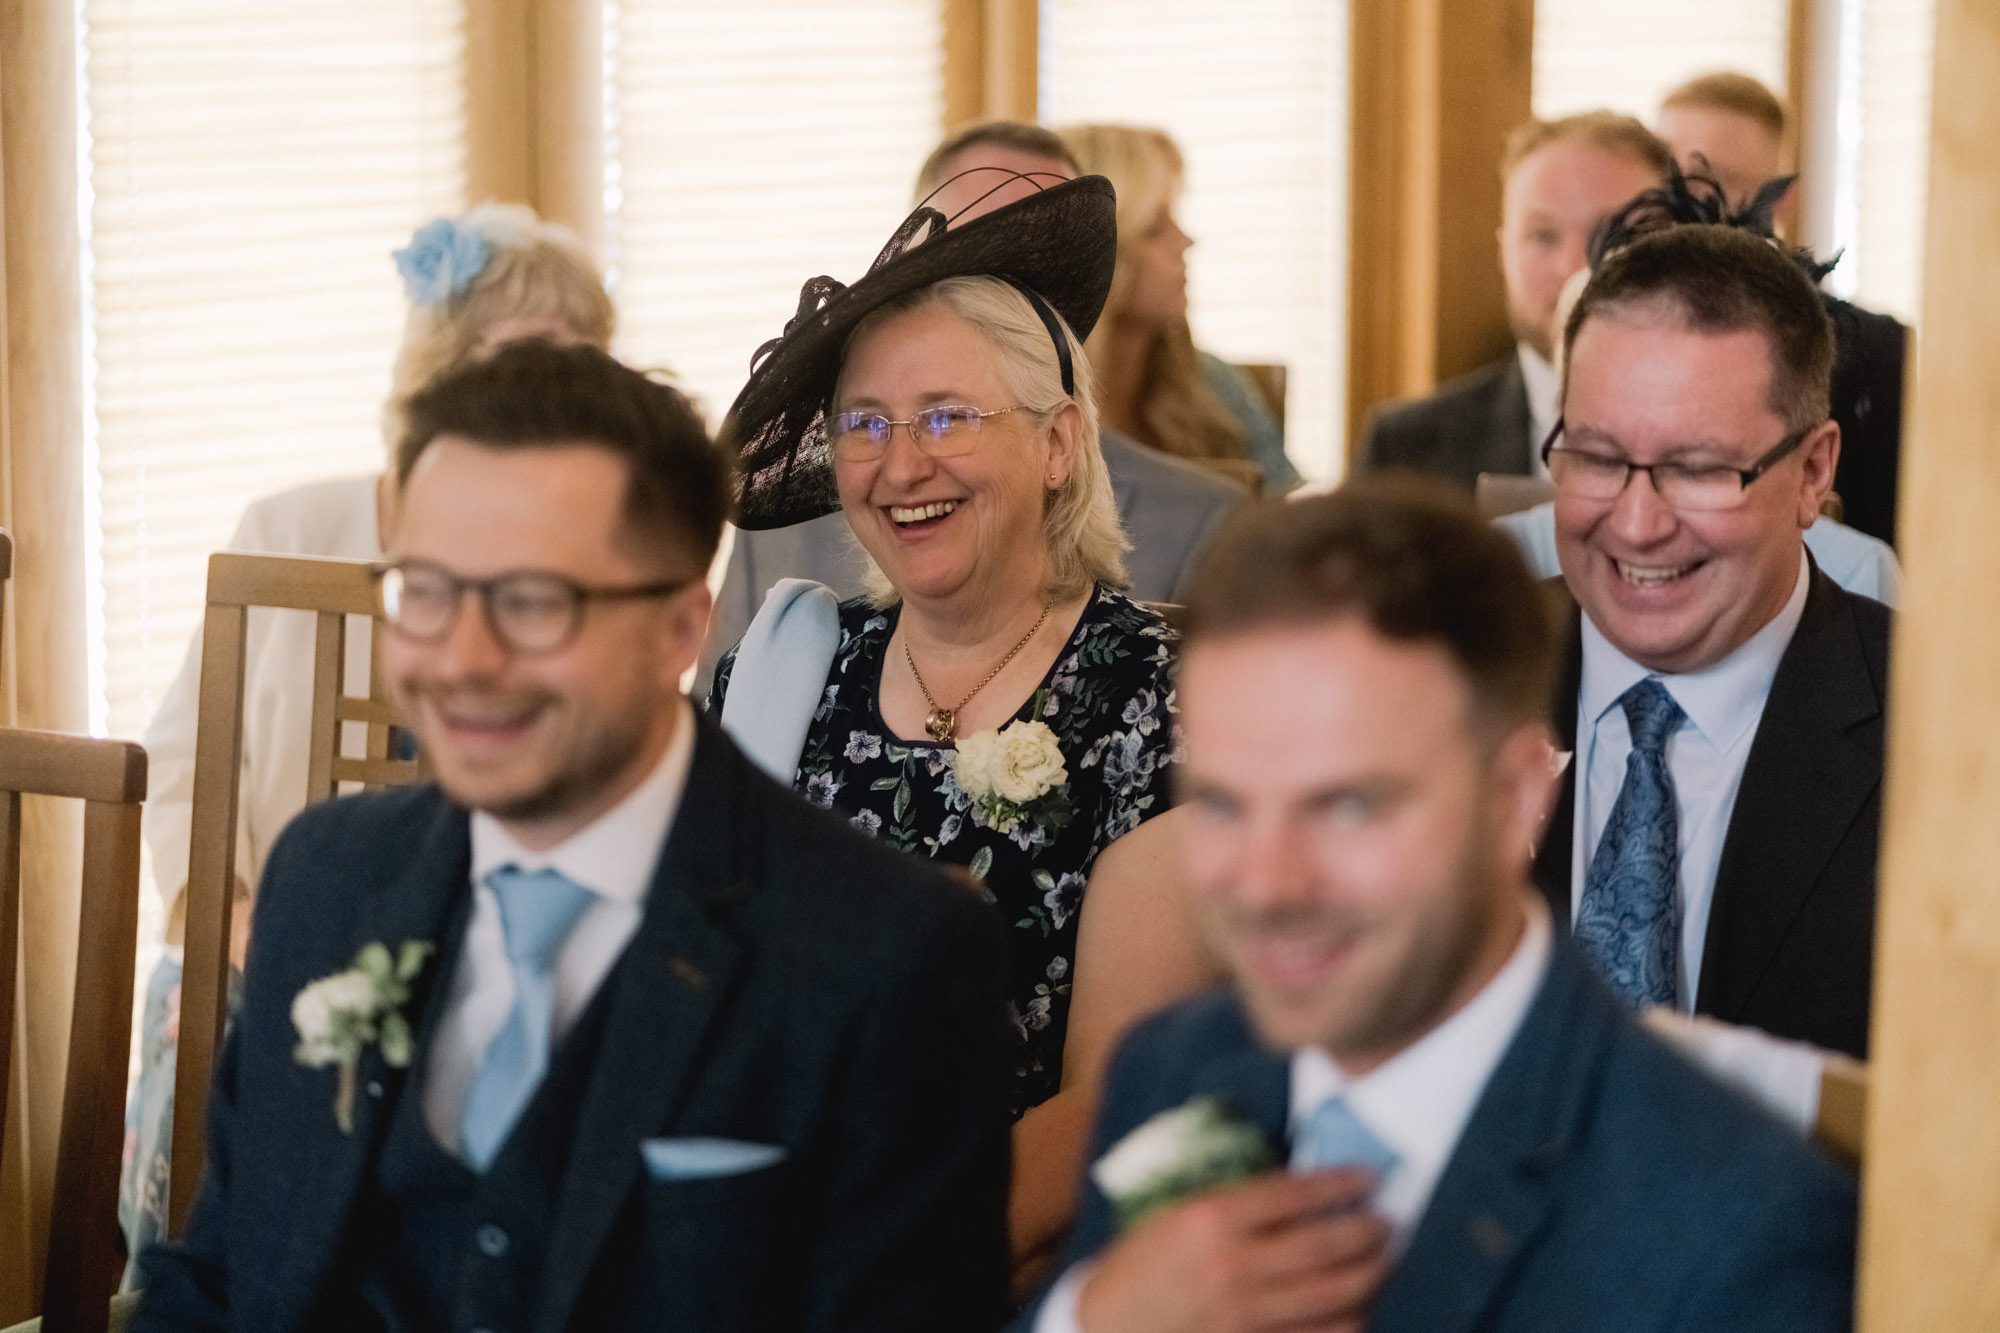 A guest smiling at a wedding at Rivervale Barn in Hampshire.